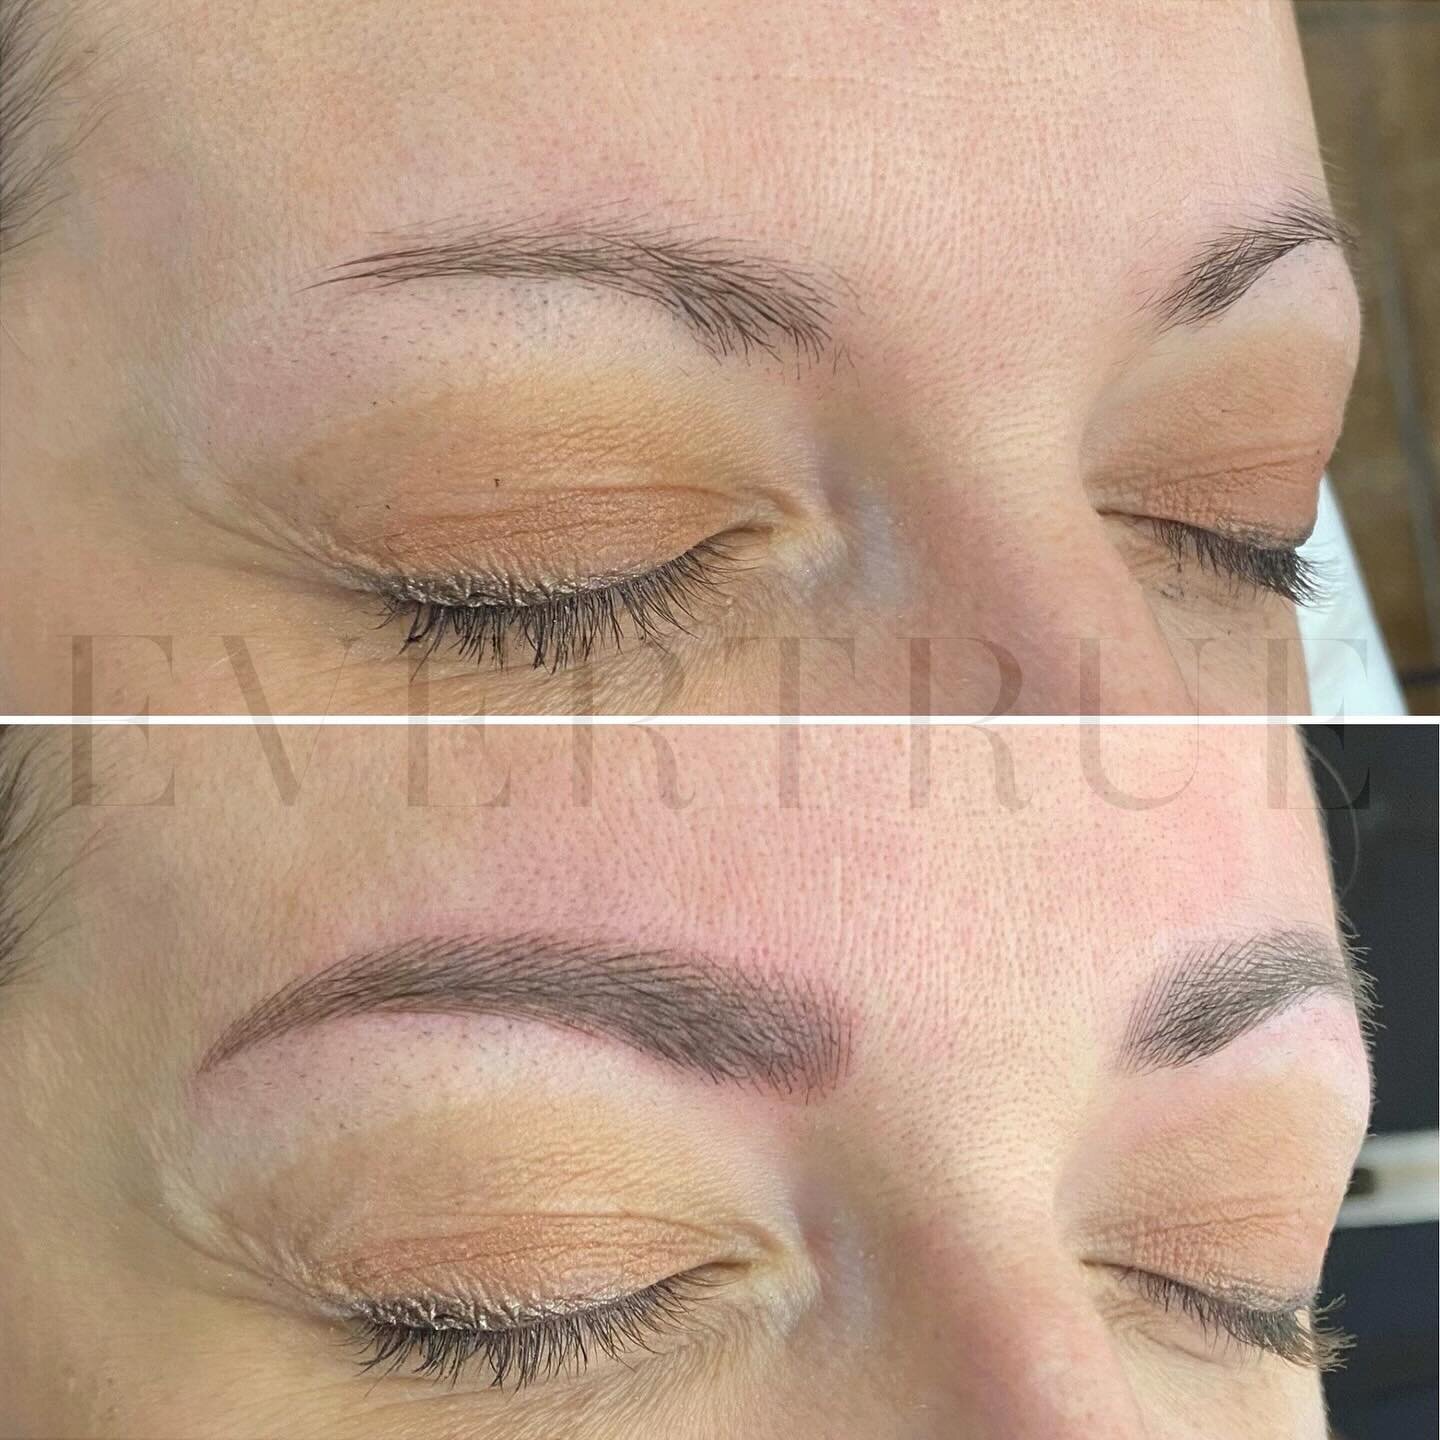 Bold is beautiful! With just the right amount of definition. 
.
Combination Brows&mdash; individual strokes + shading&mdash; by May (Senior Specialist, NYC)
.
#microblading #microbladingeyebrows #bespokebrows #combinationbrows #powderbrows #eyebrows 